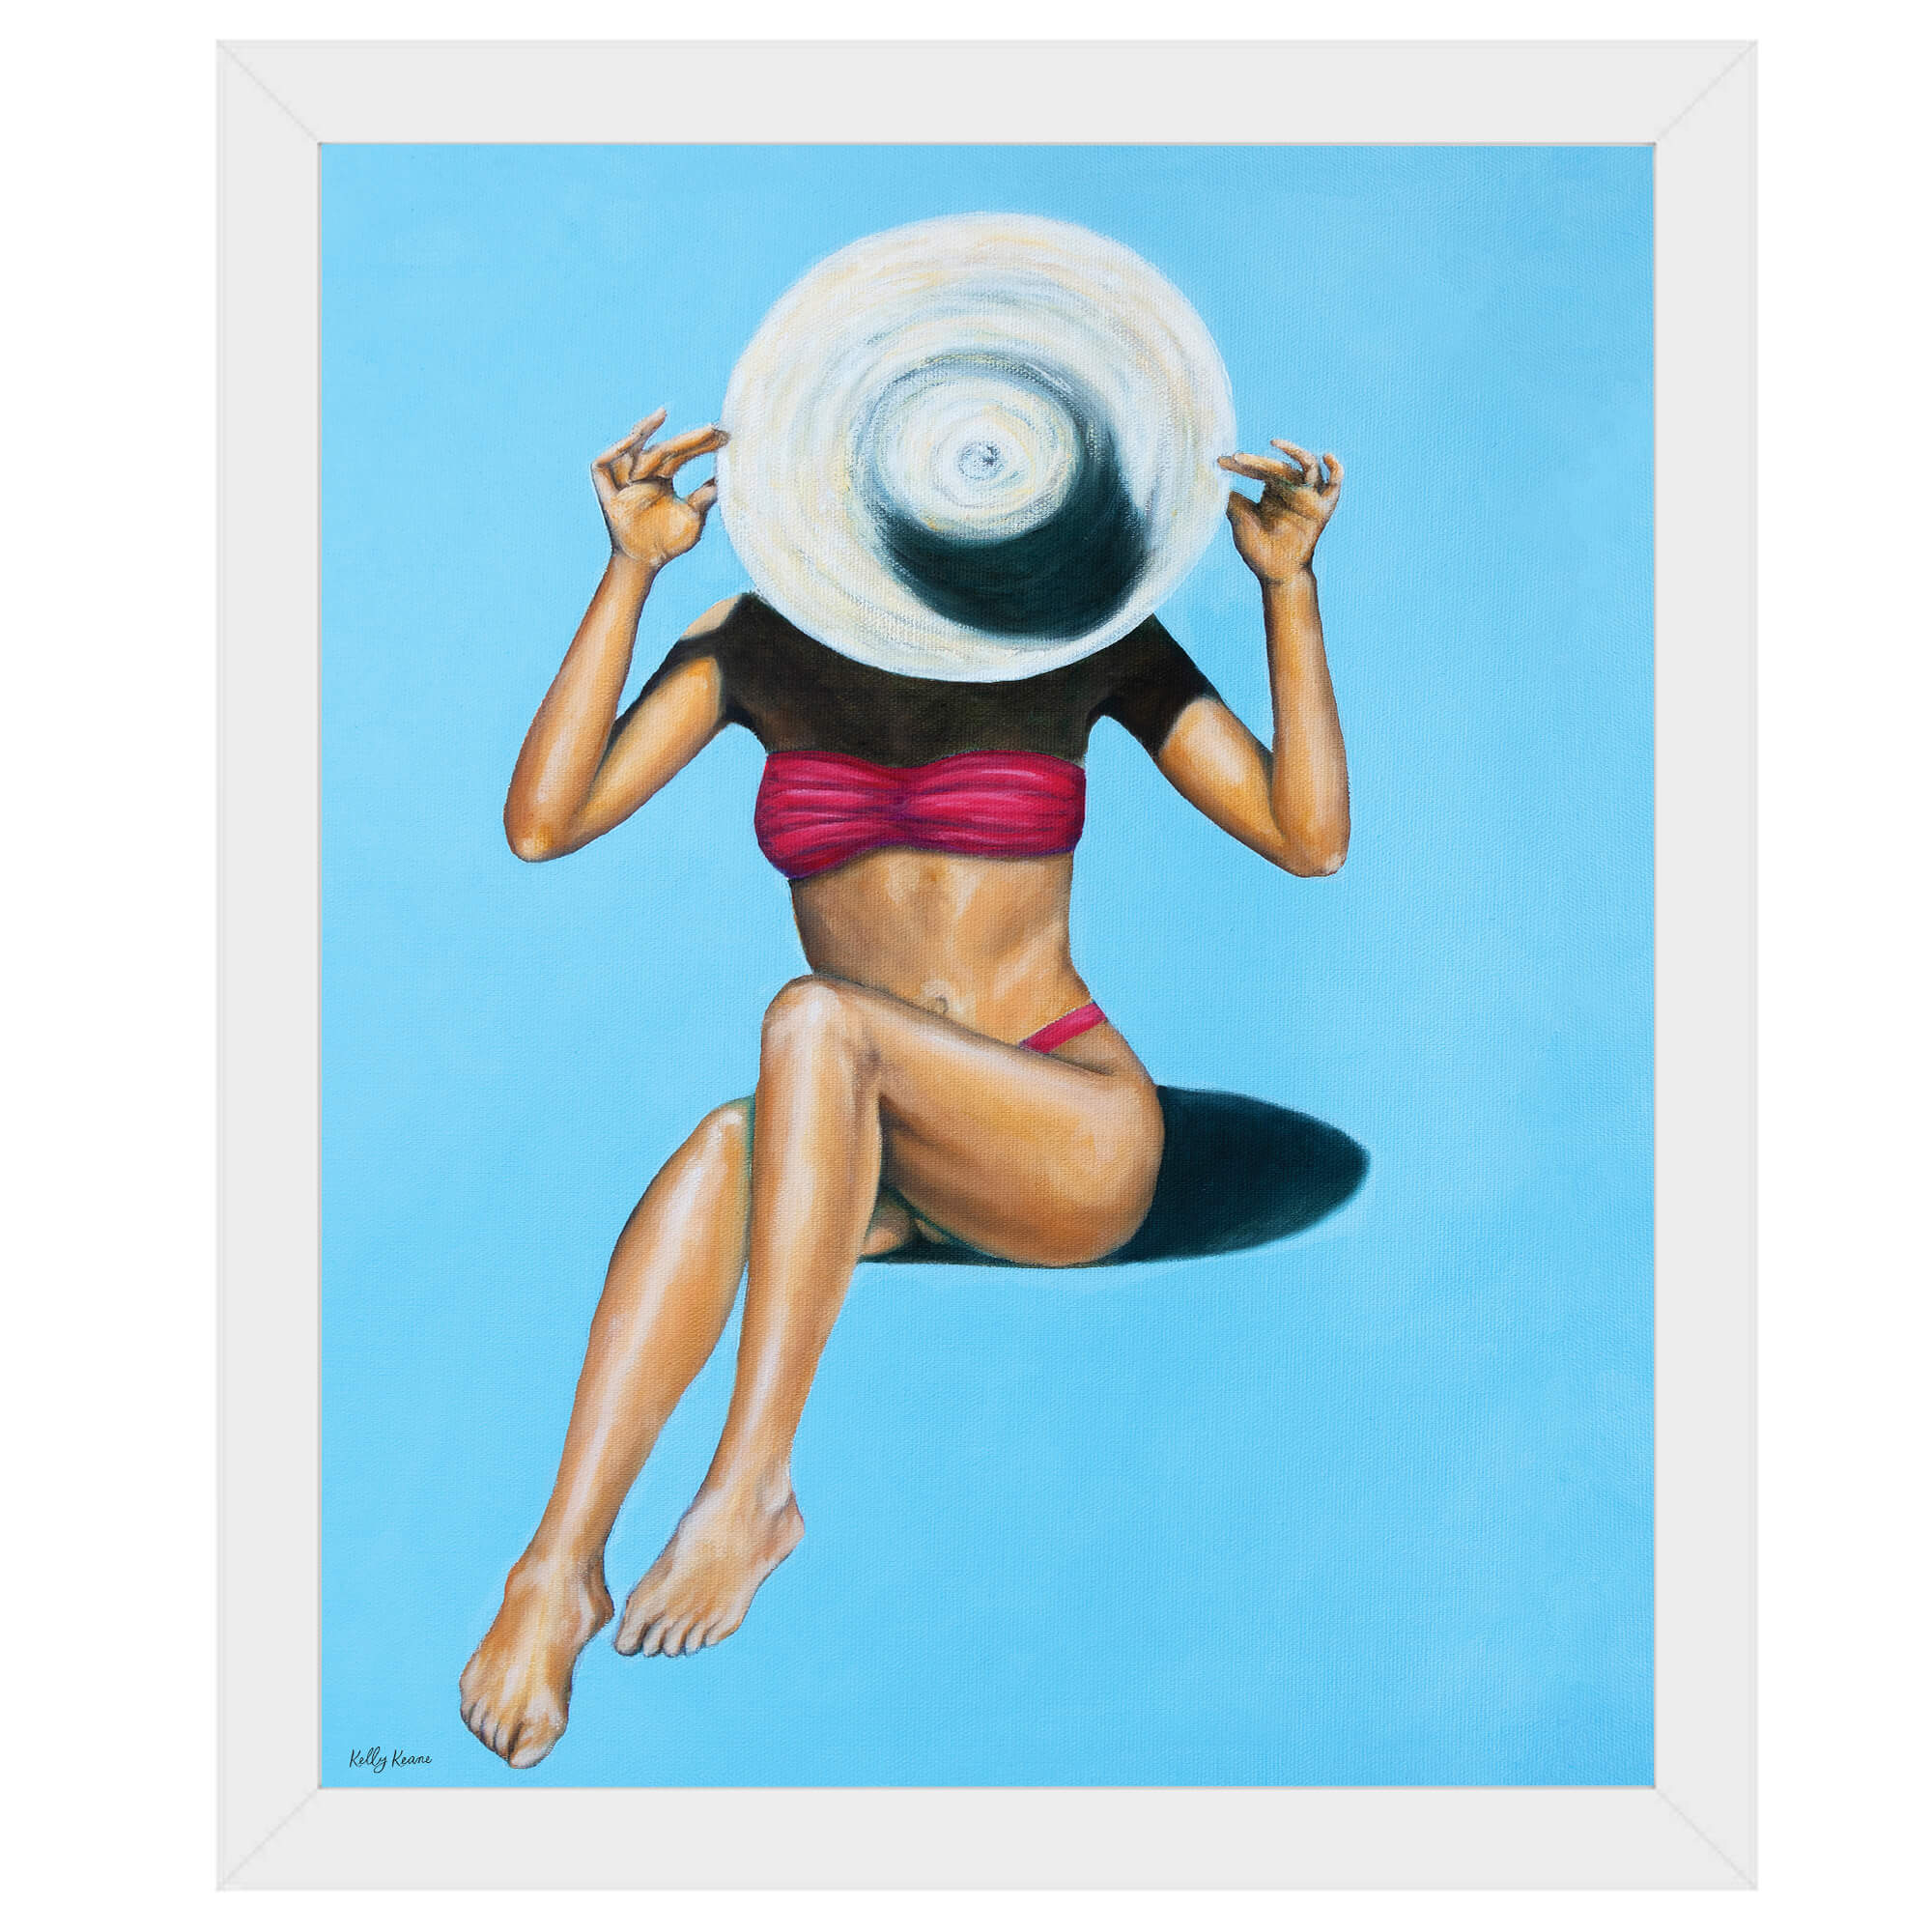 Paper giclée art print featuring a woman at the beach covering her face by Hawaii artist Kelly Keane